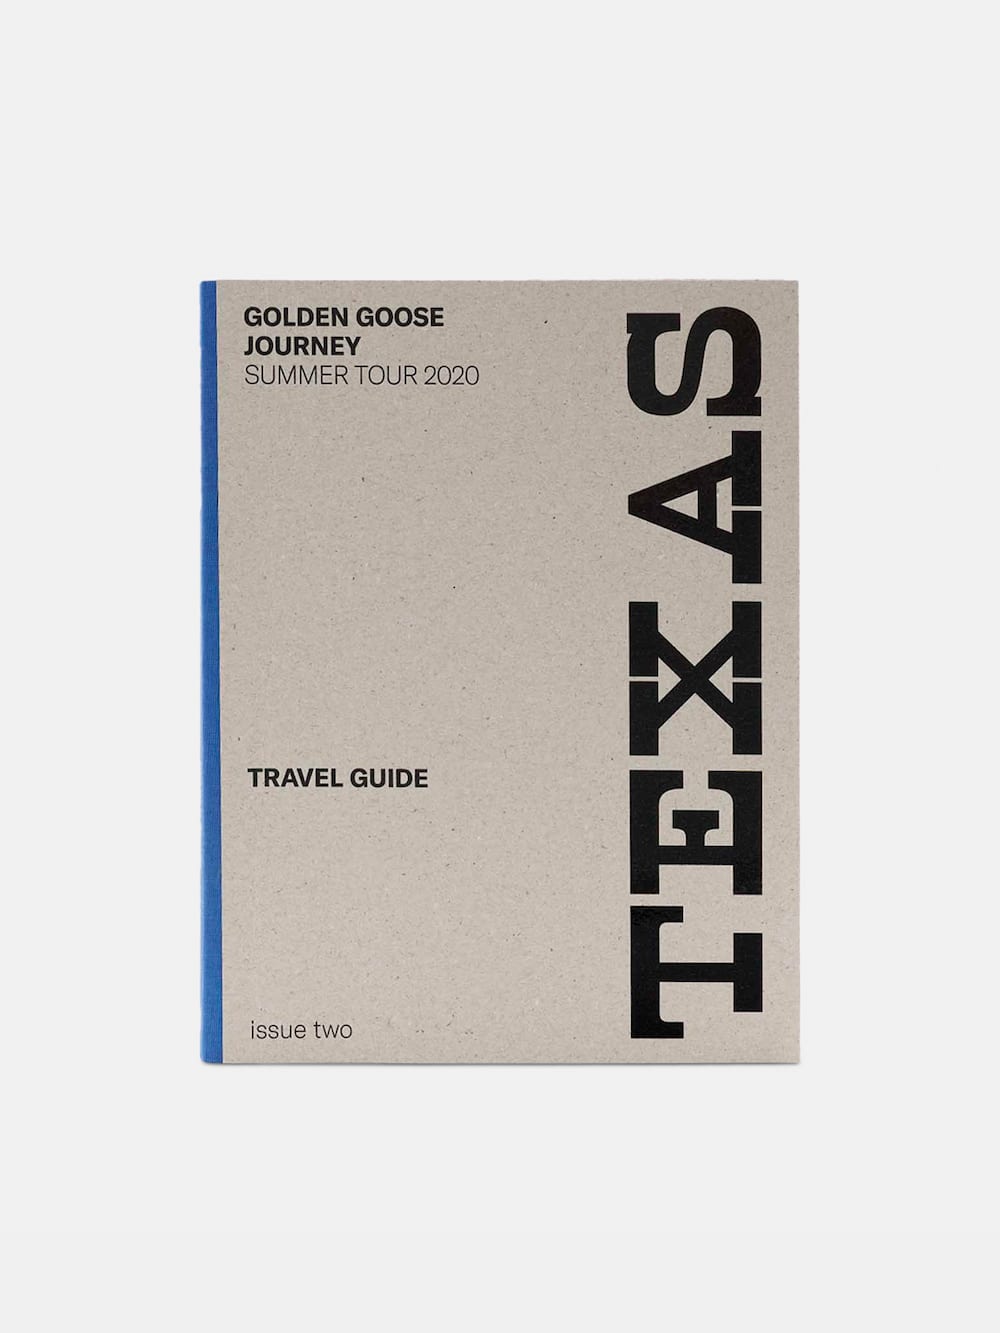 Golden Goose - TRAVEL GUIDE Texas Issue 2 in 